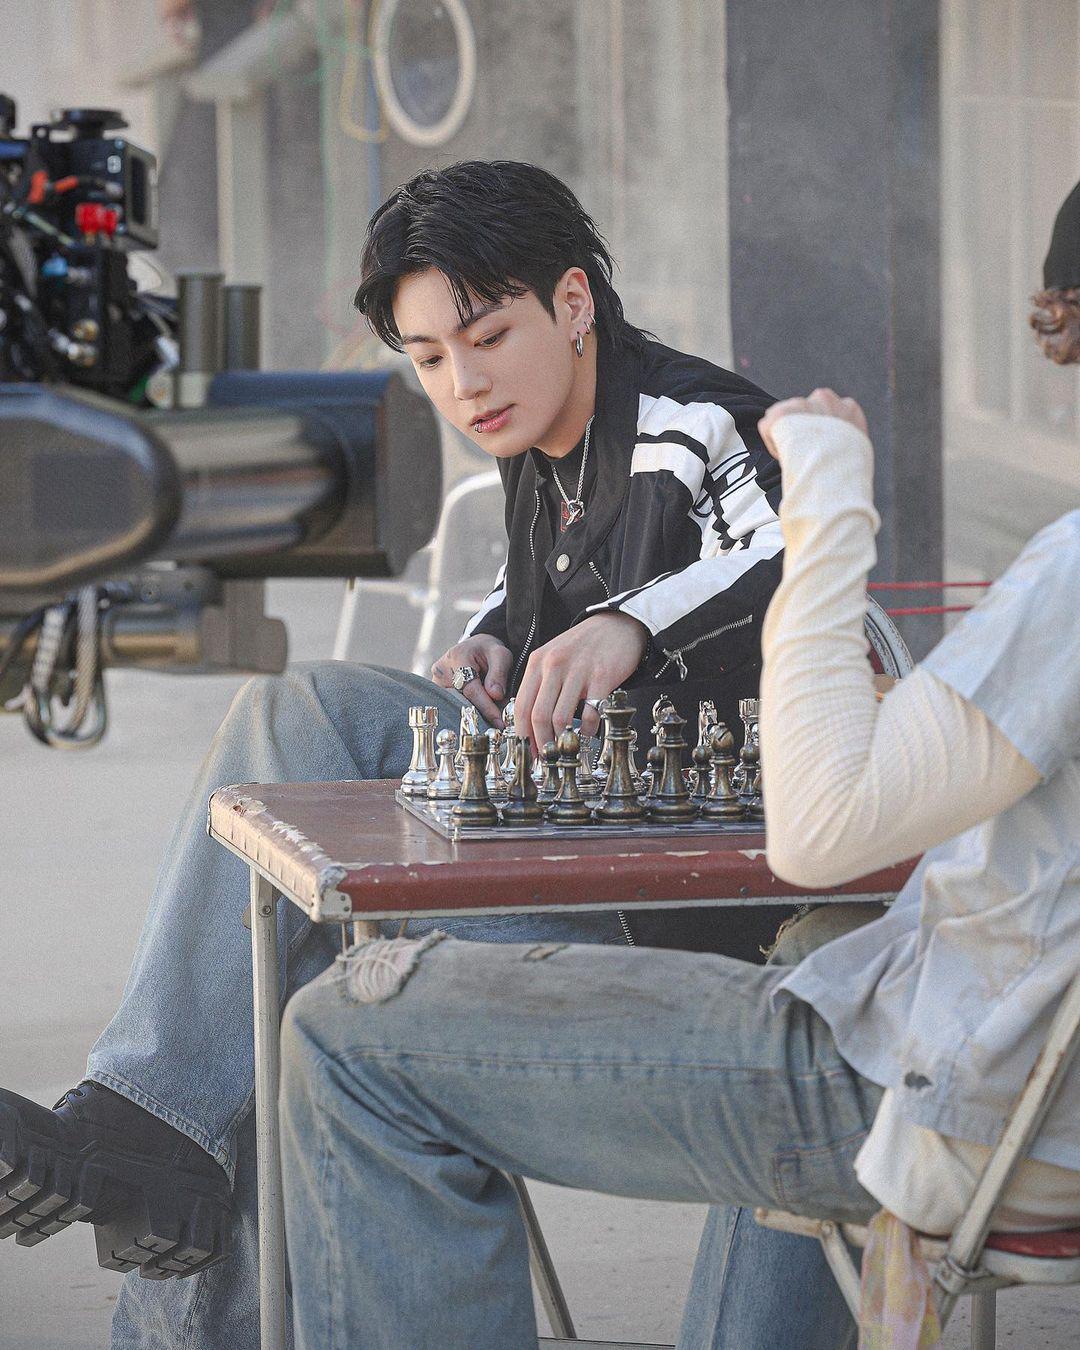 Jungkook is said to have learned how to play chess on the sets of the music video and beat Jack Harlow at the game. Peak Golden Maknae behaviour